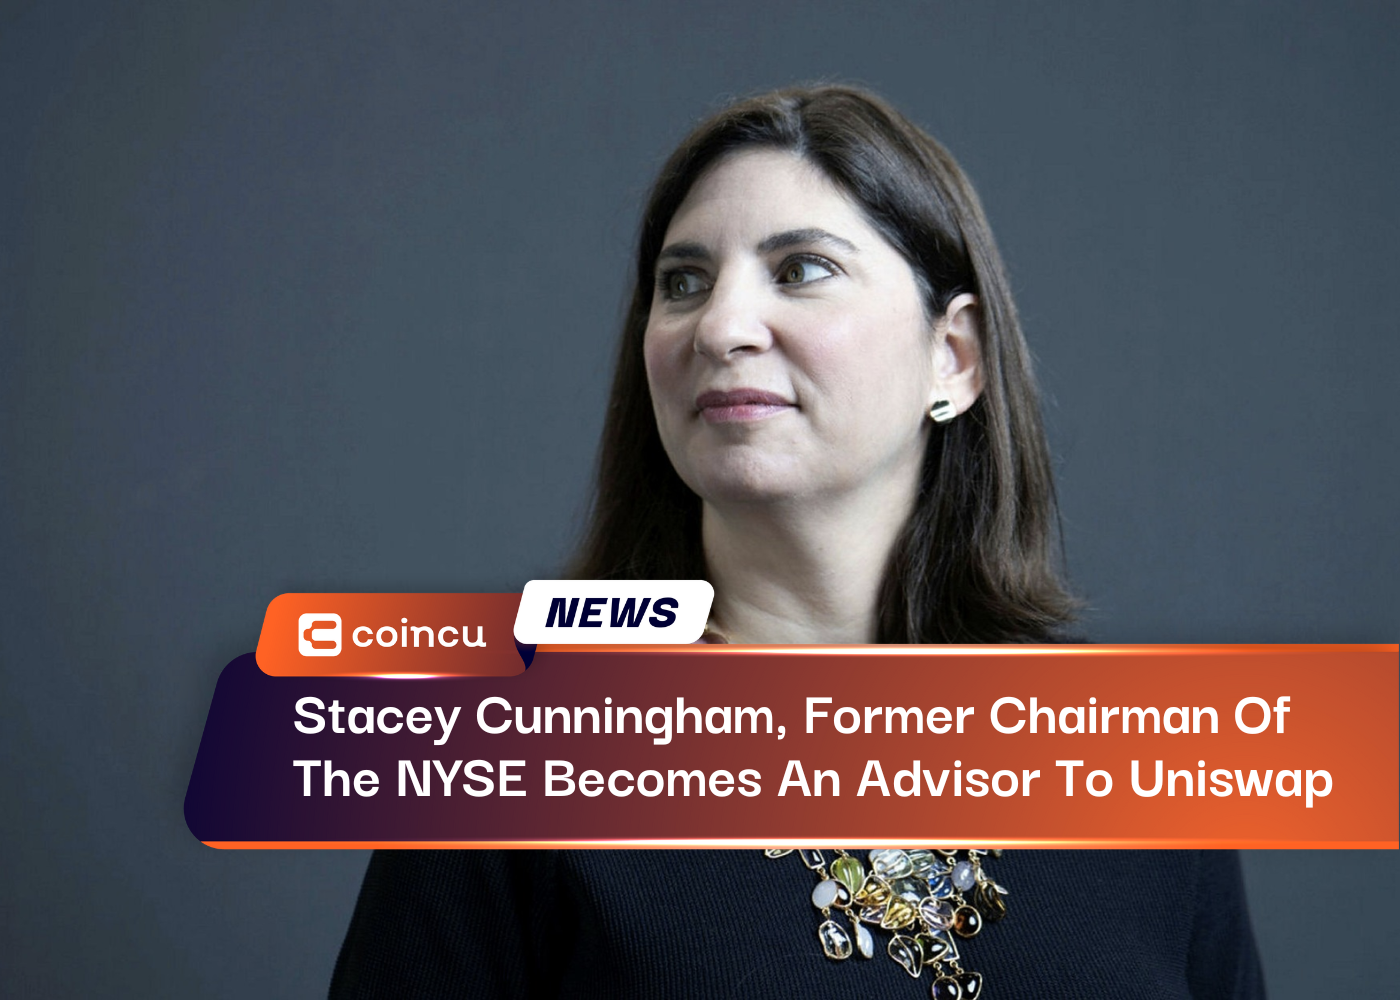 Stacey Cunningham, Former Chairman Of The NYSE Becomes An Advisor To Uniswap